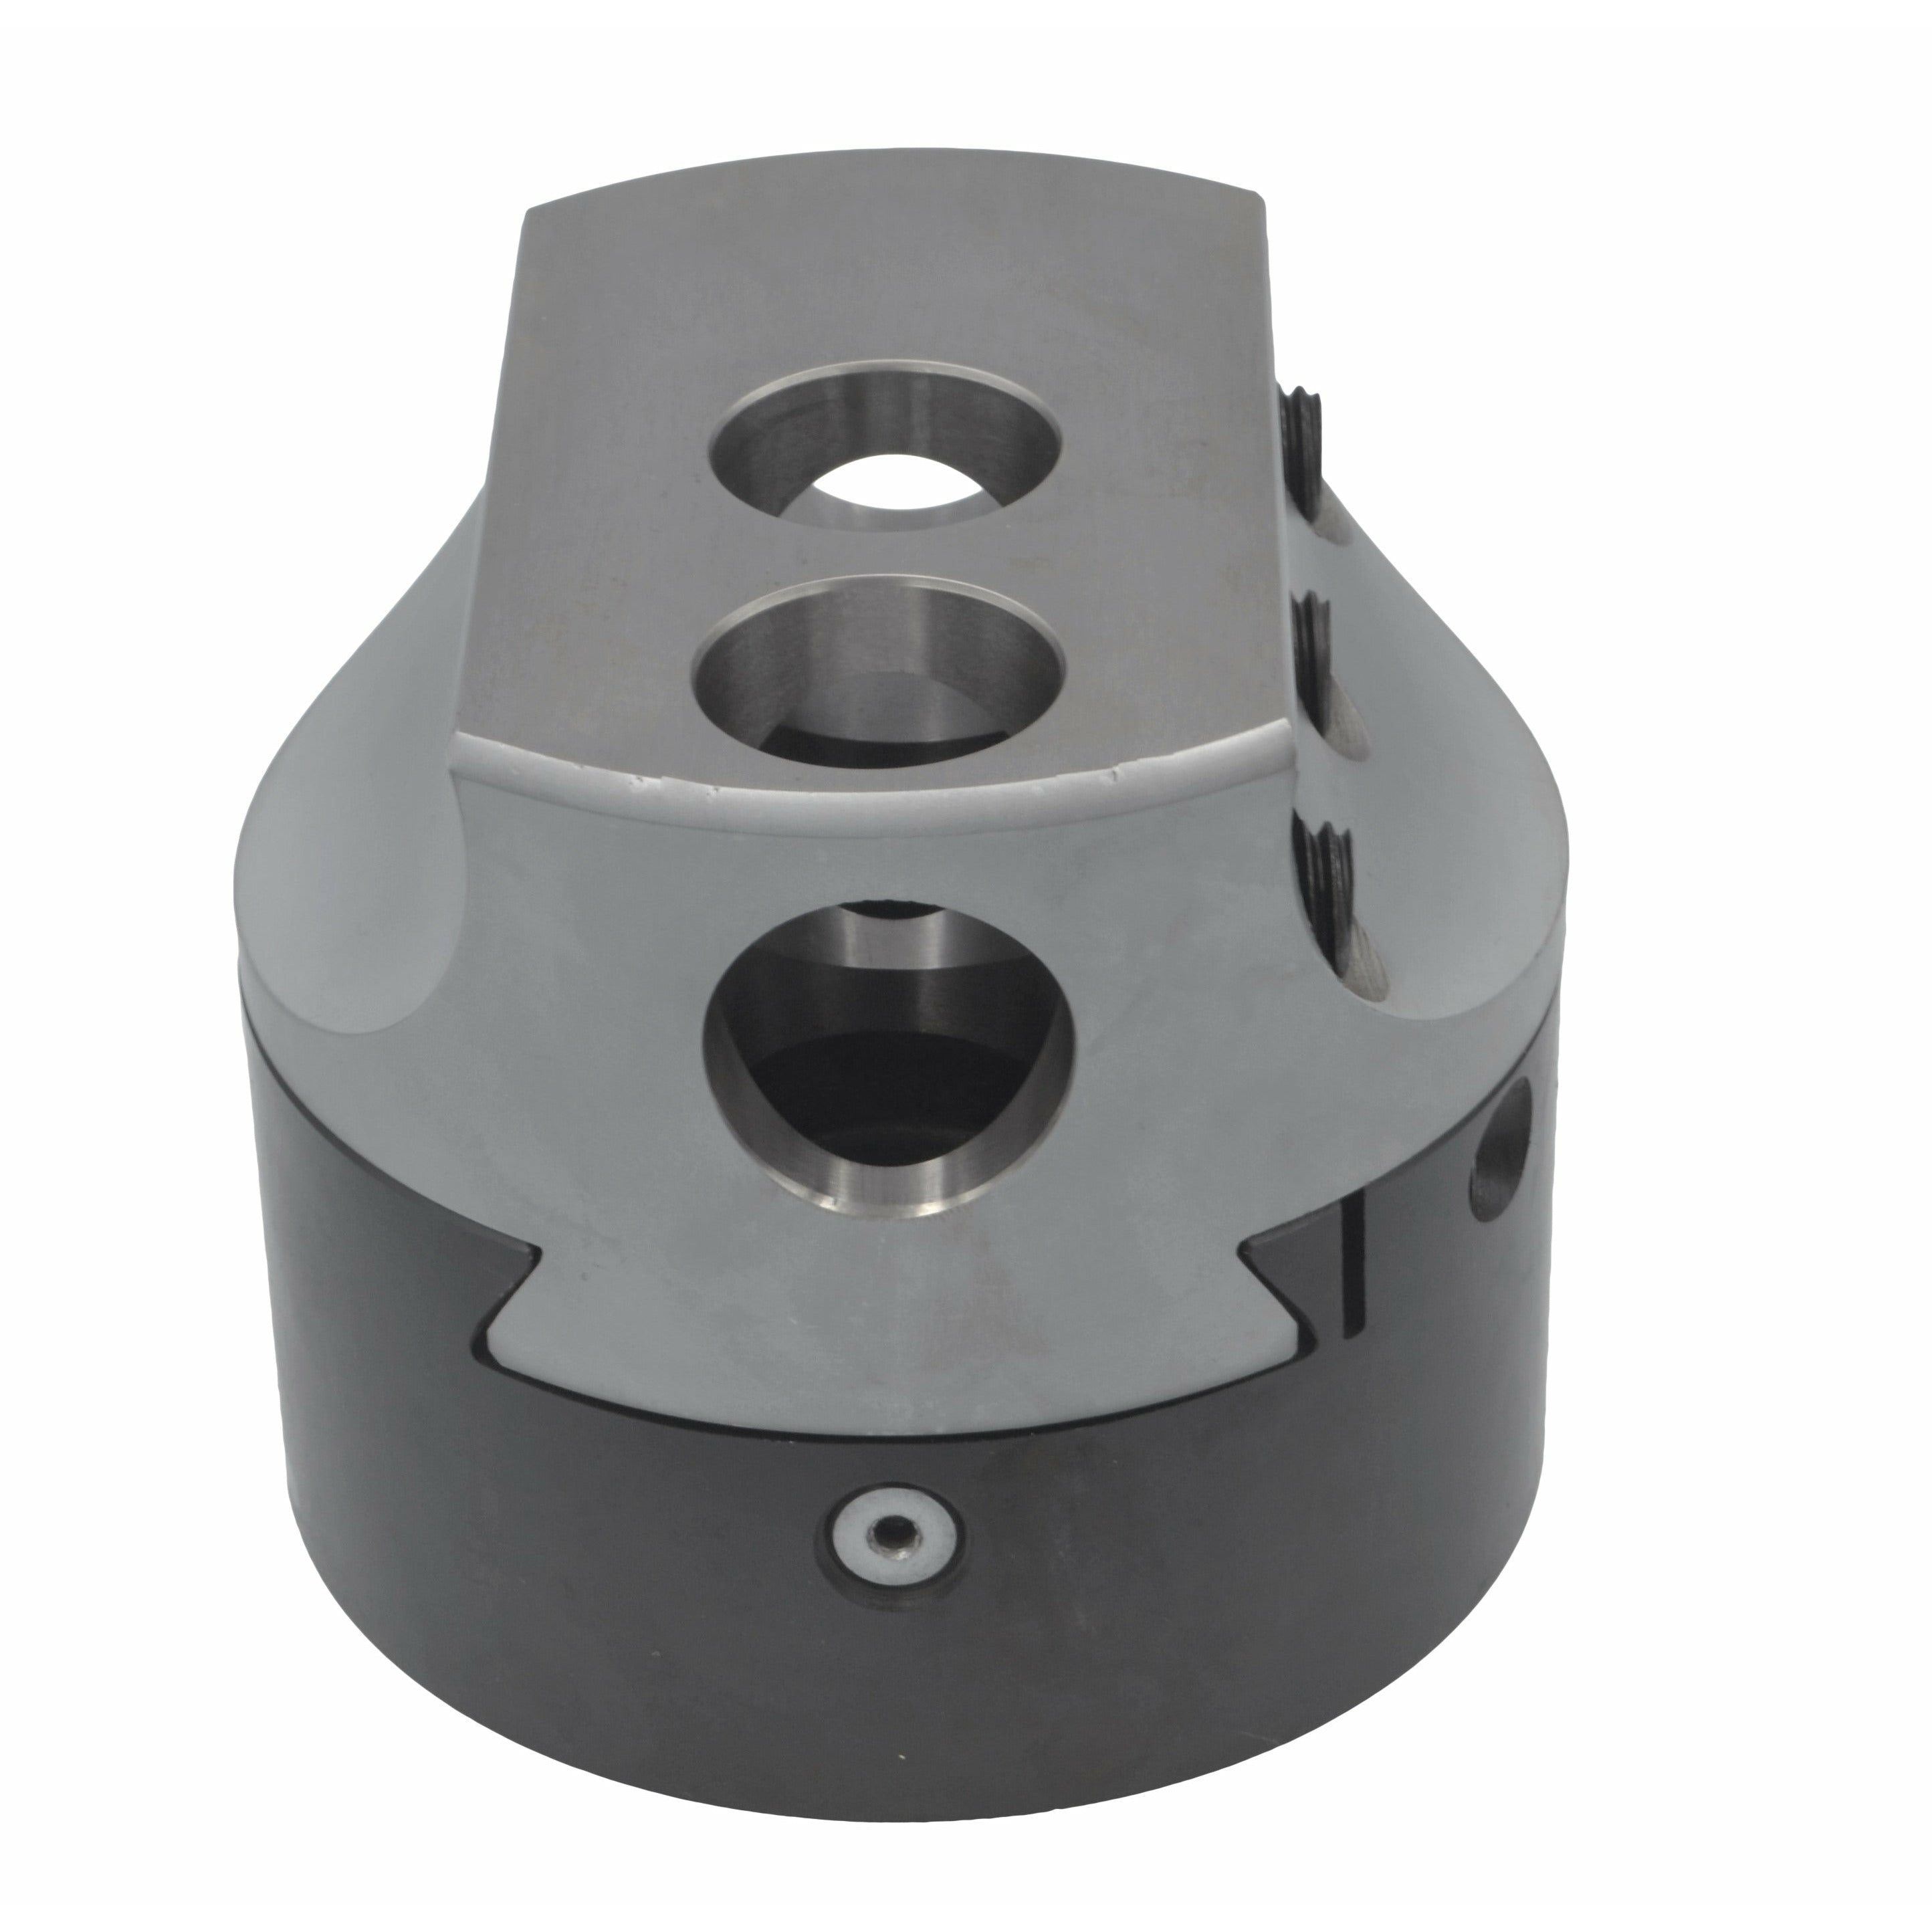 4" 100mm Boring head with 1.5"x18 TPI